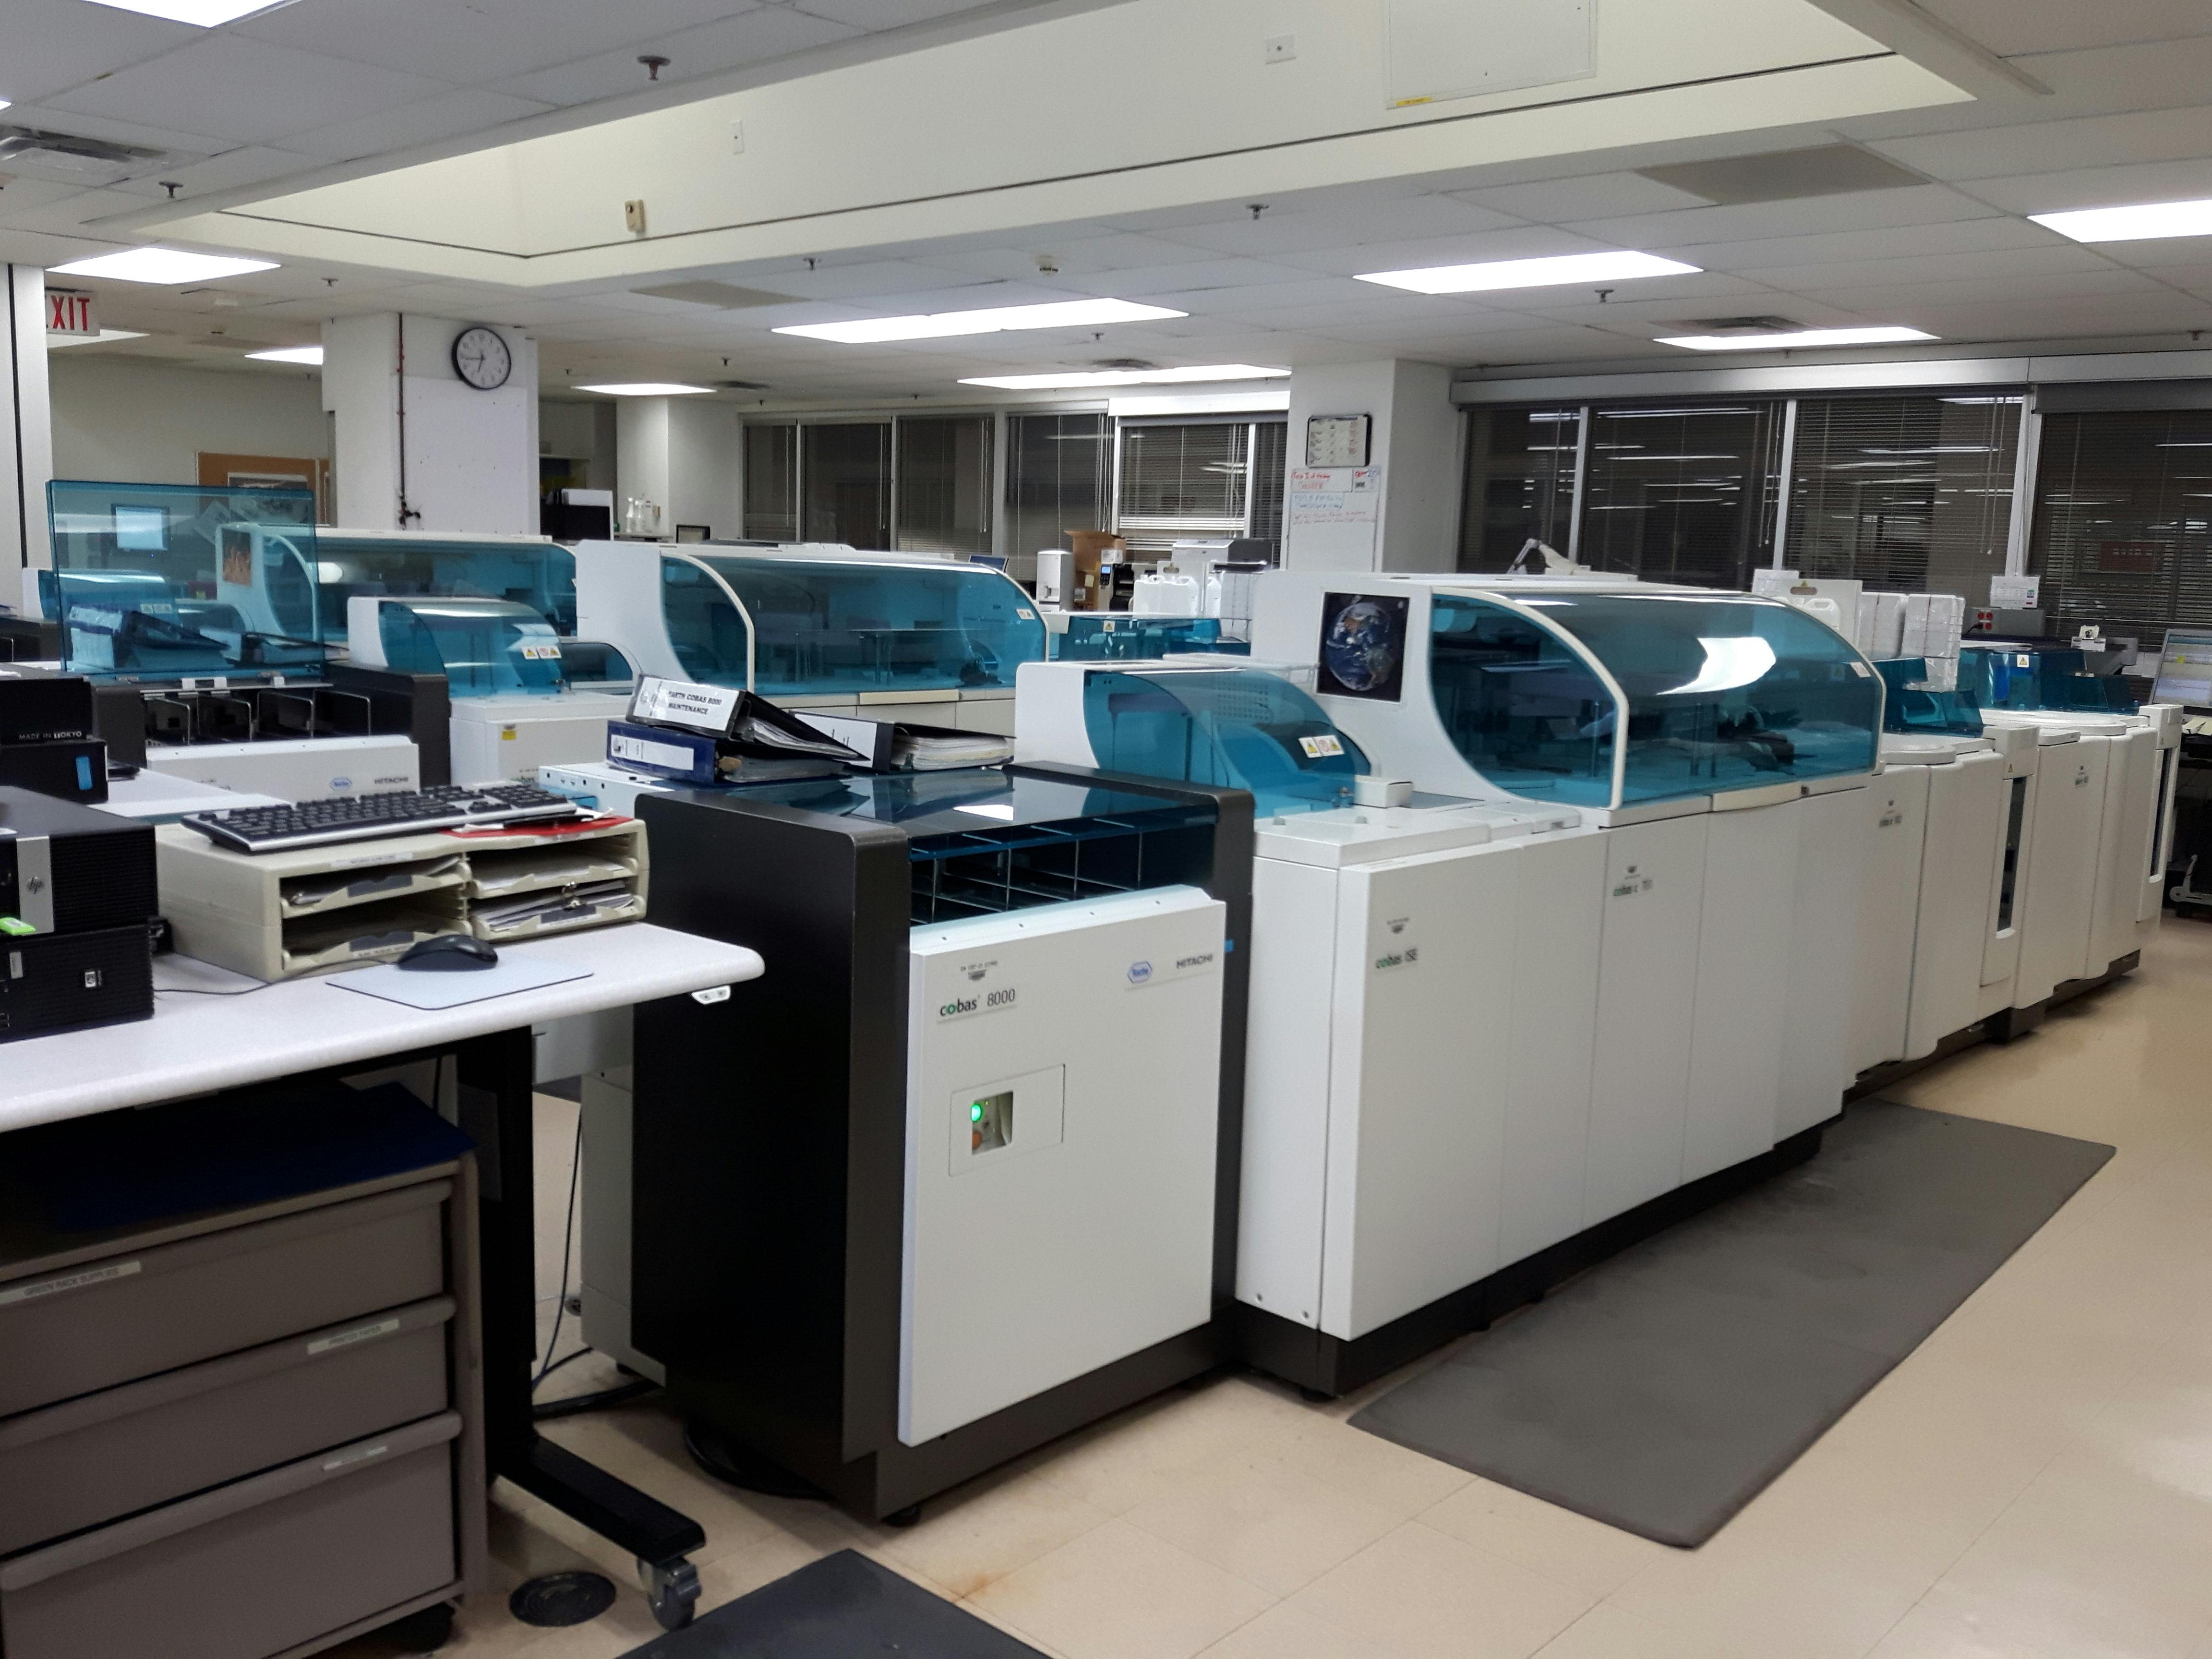 Automated lab equipment generates large numbers of common test results